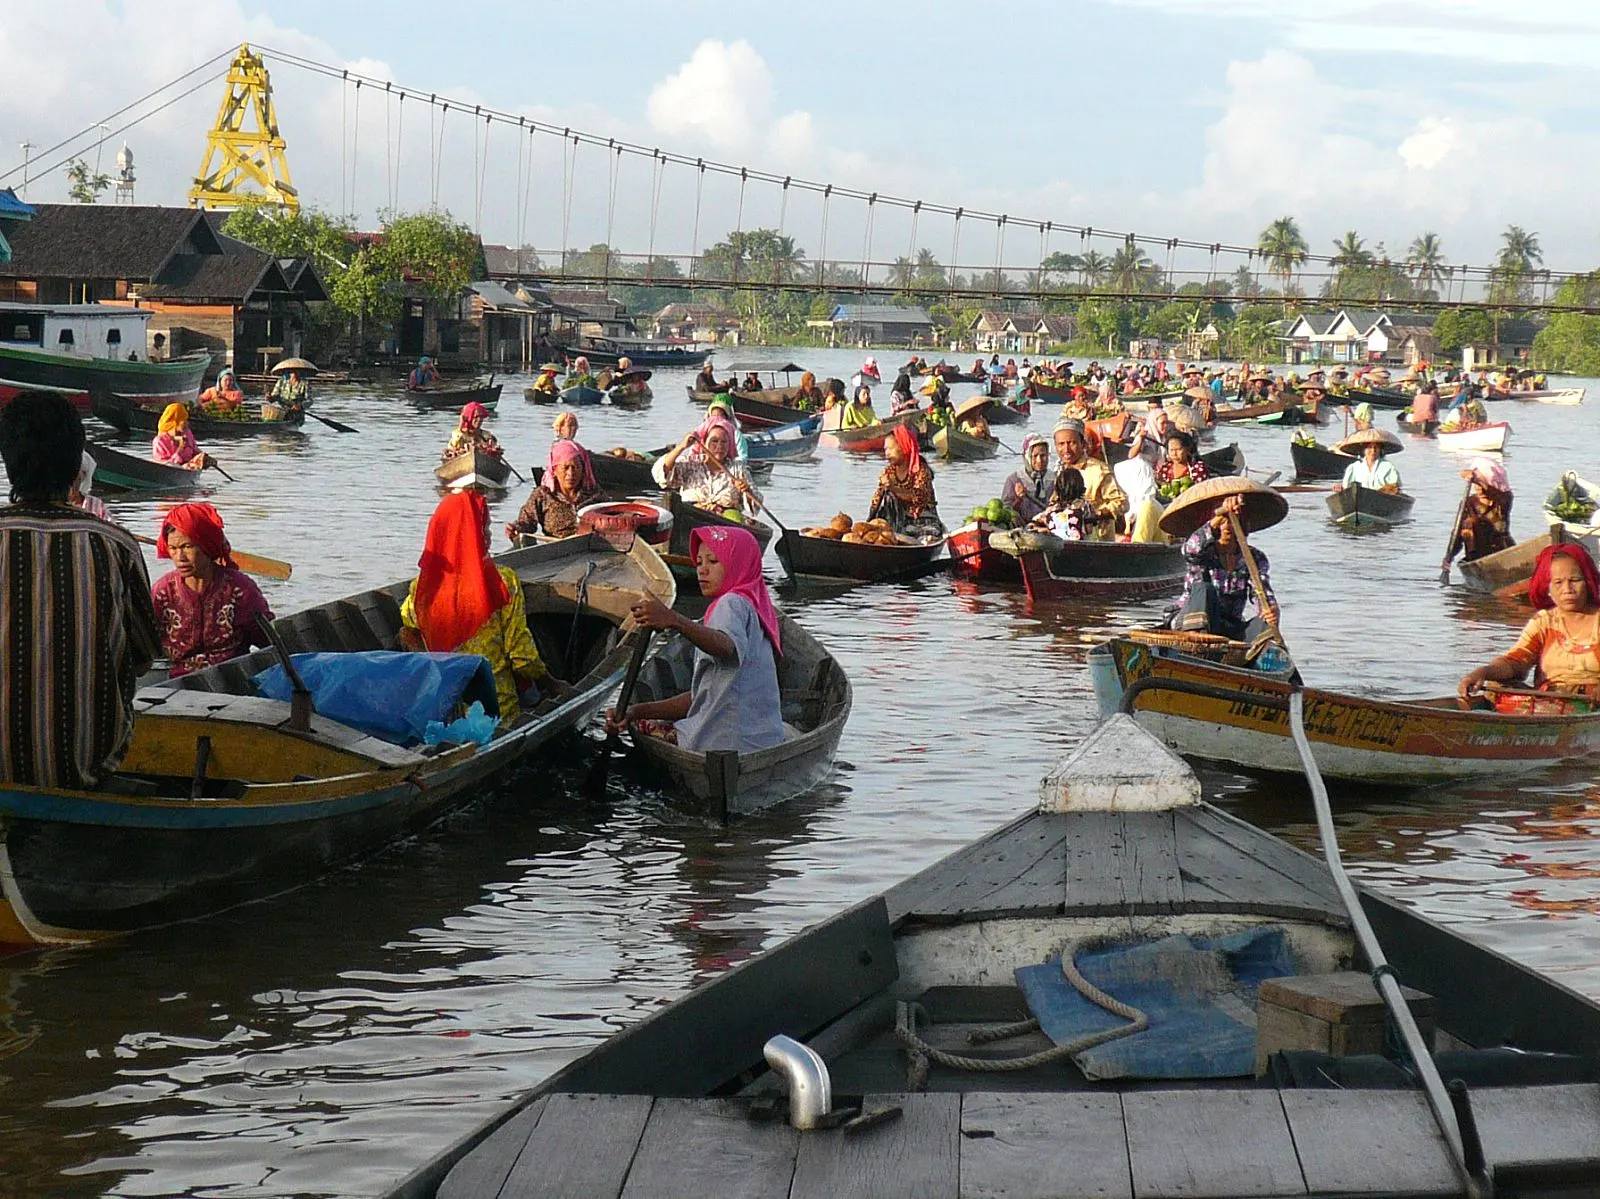 The amazing floating market at Kalimantan in Borneo. 